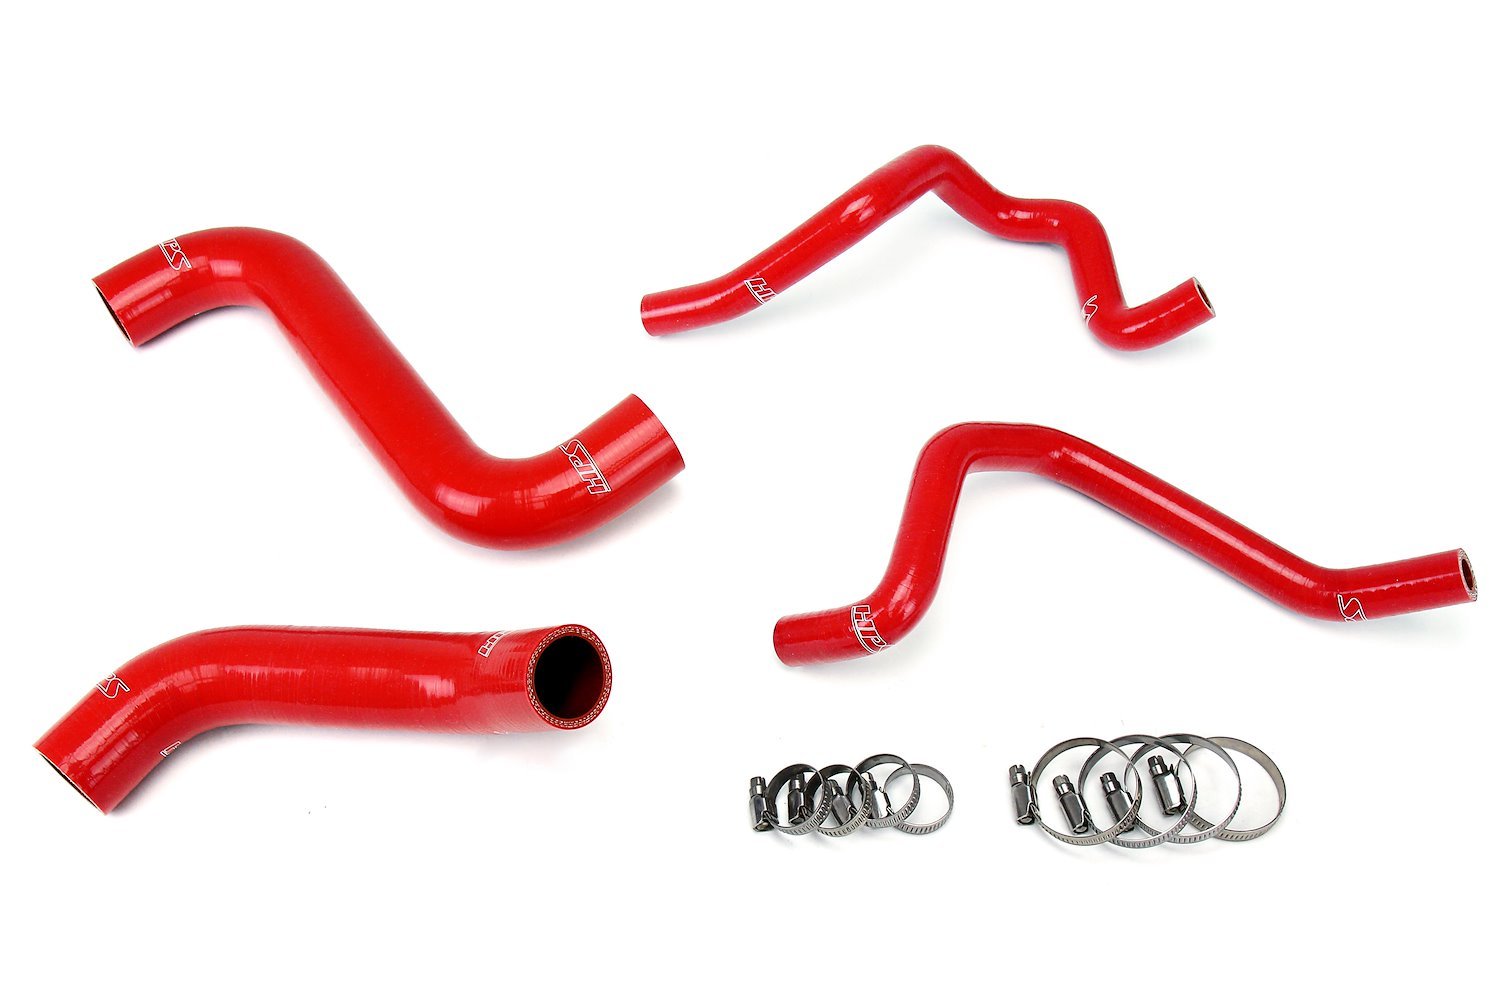 57-1811-RED Radiator and Heater Hose Kit, 3-Ply Reinforced Silicone, Replaces Rubber Radiator & Heater Coolant Hoses